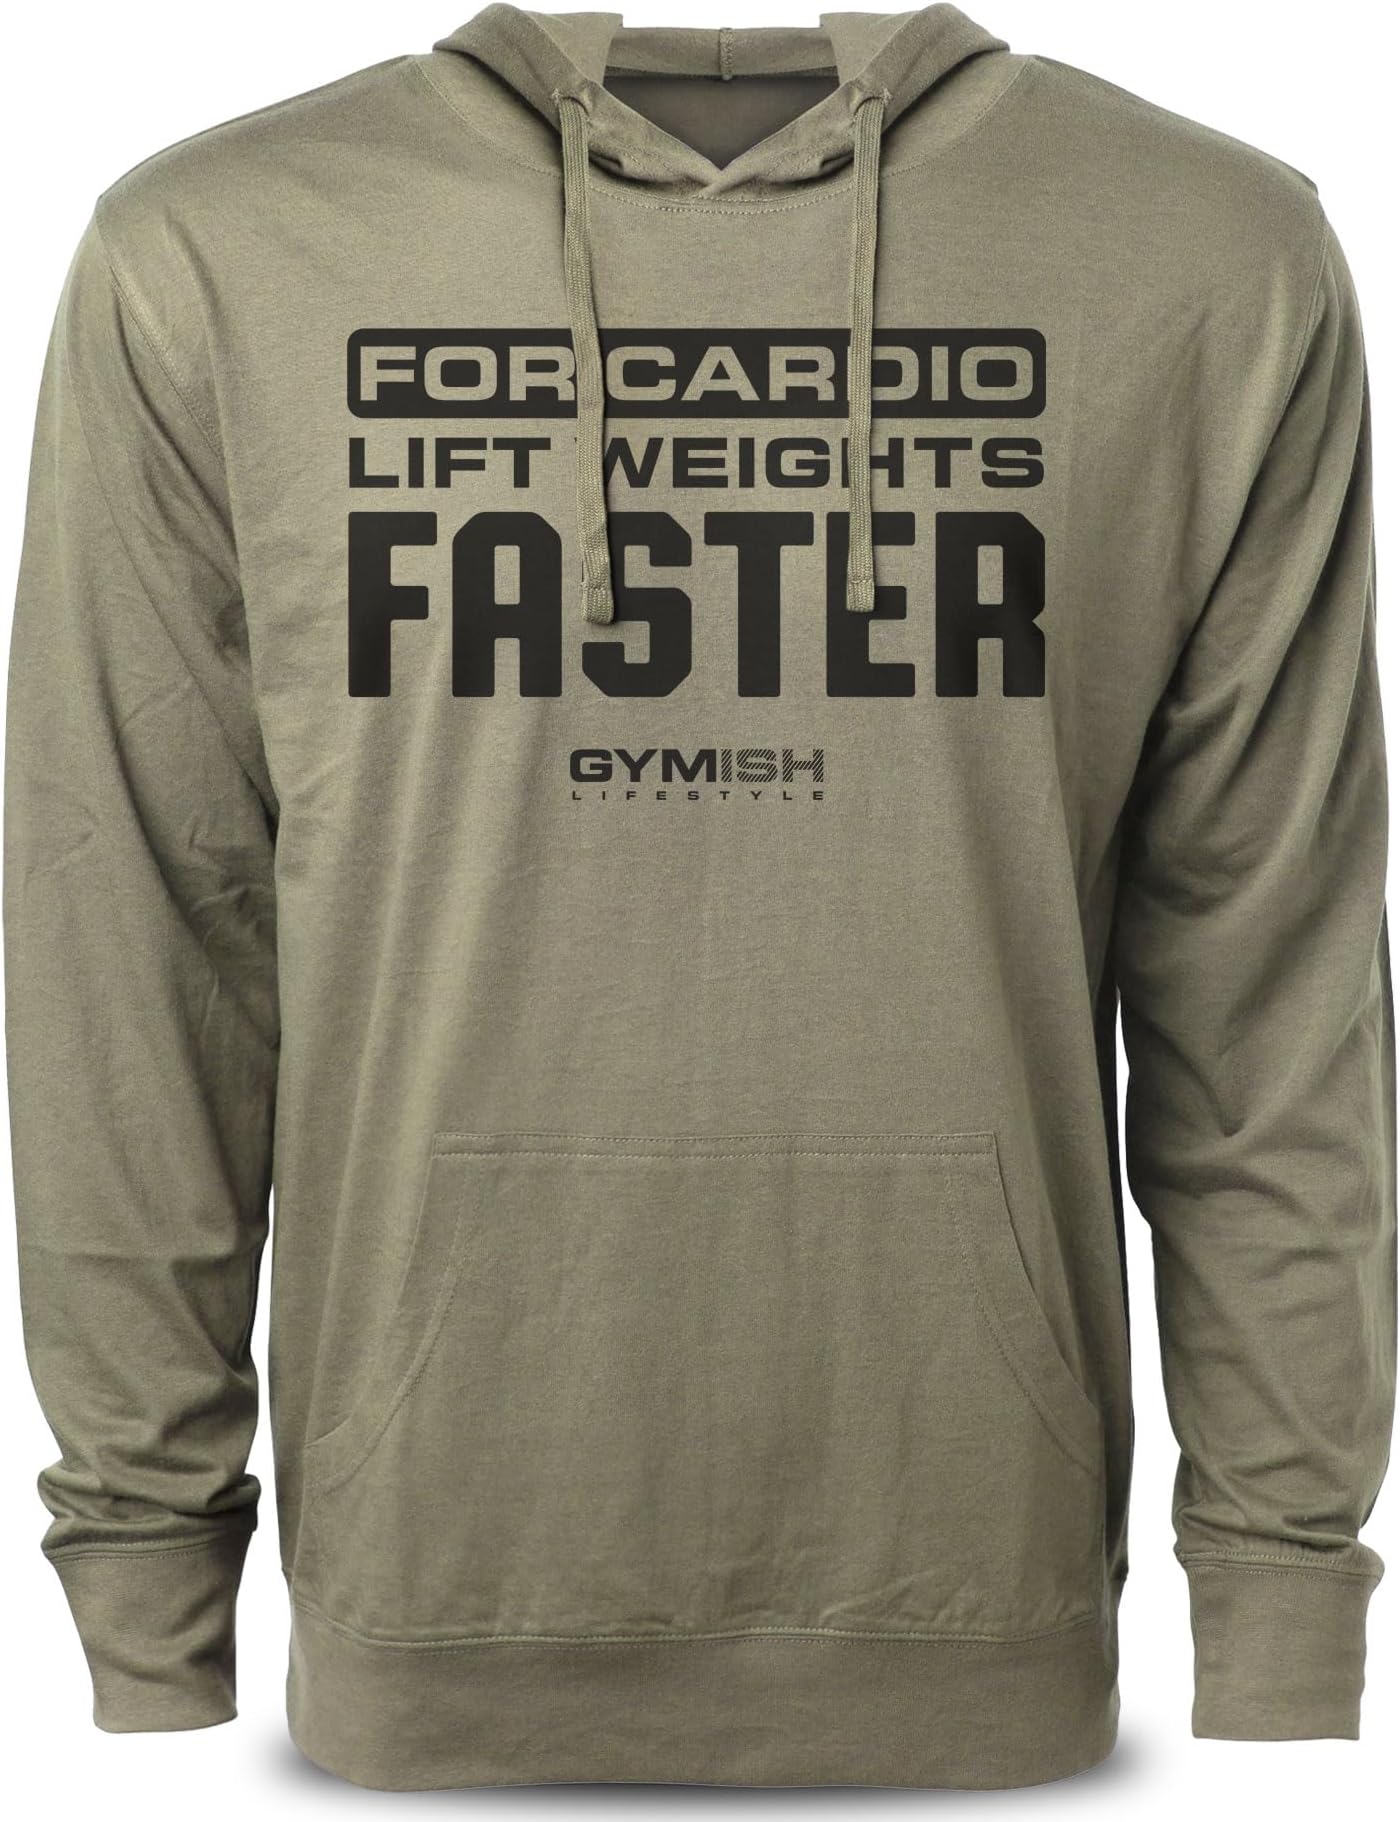 093. For Cardio Lift Weights Faster Motivational Gym Hoodie